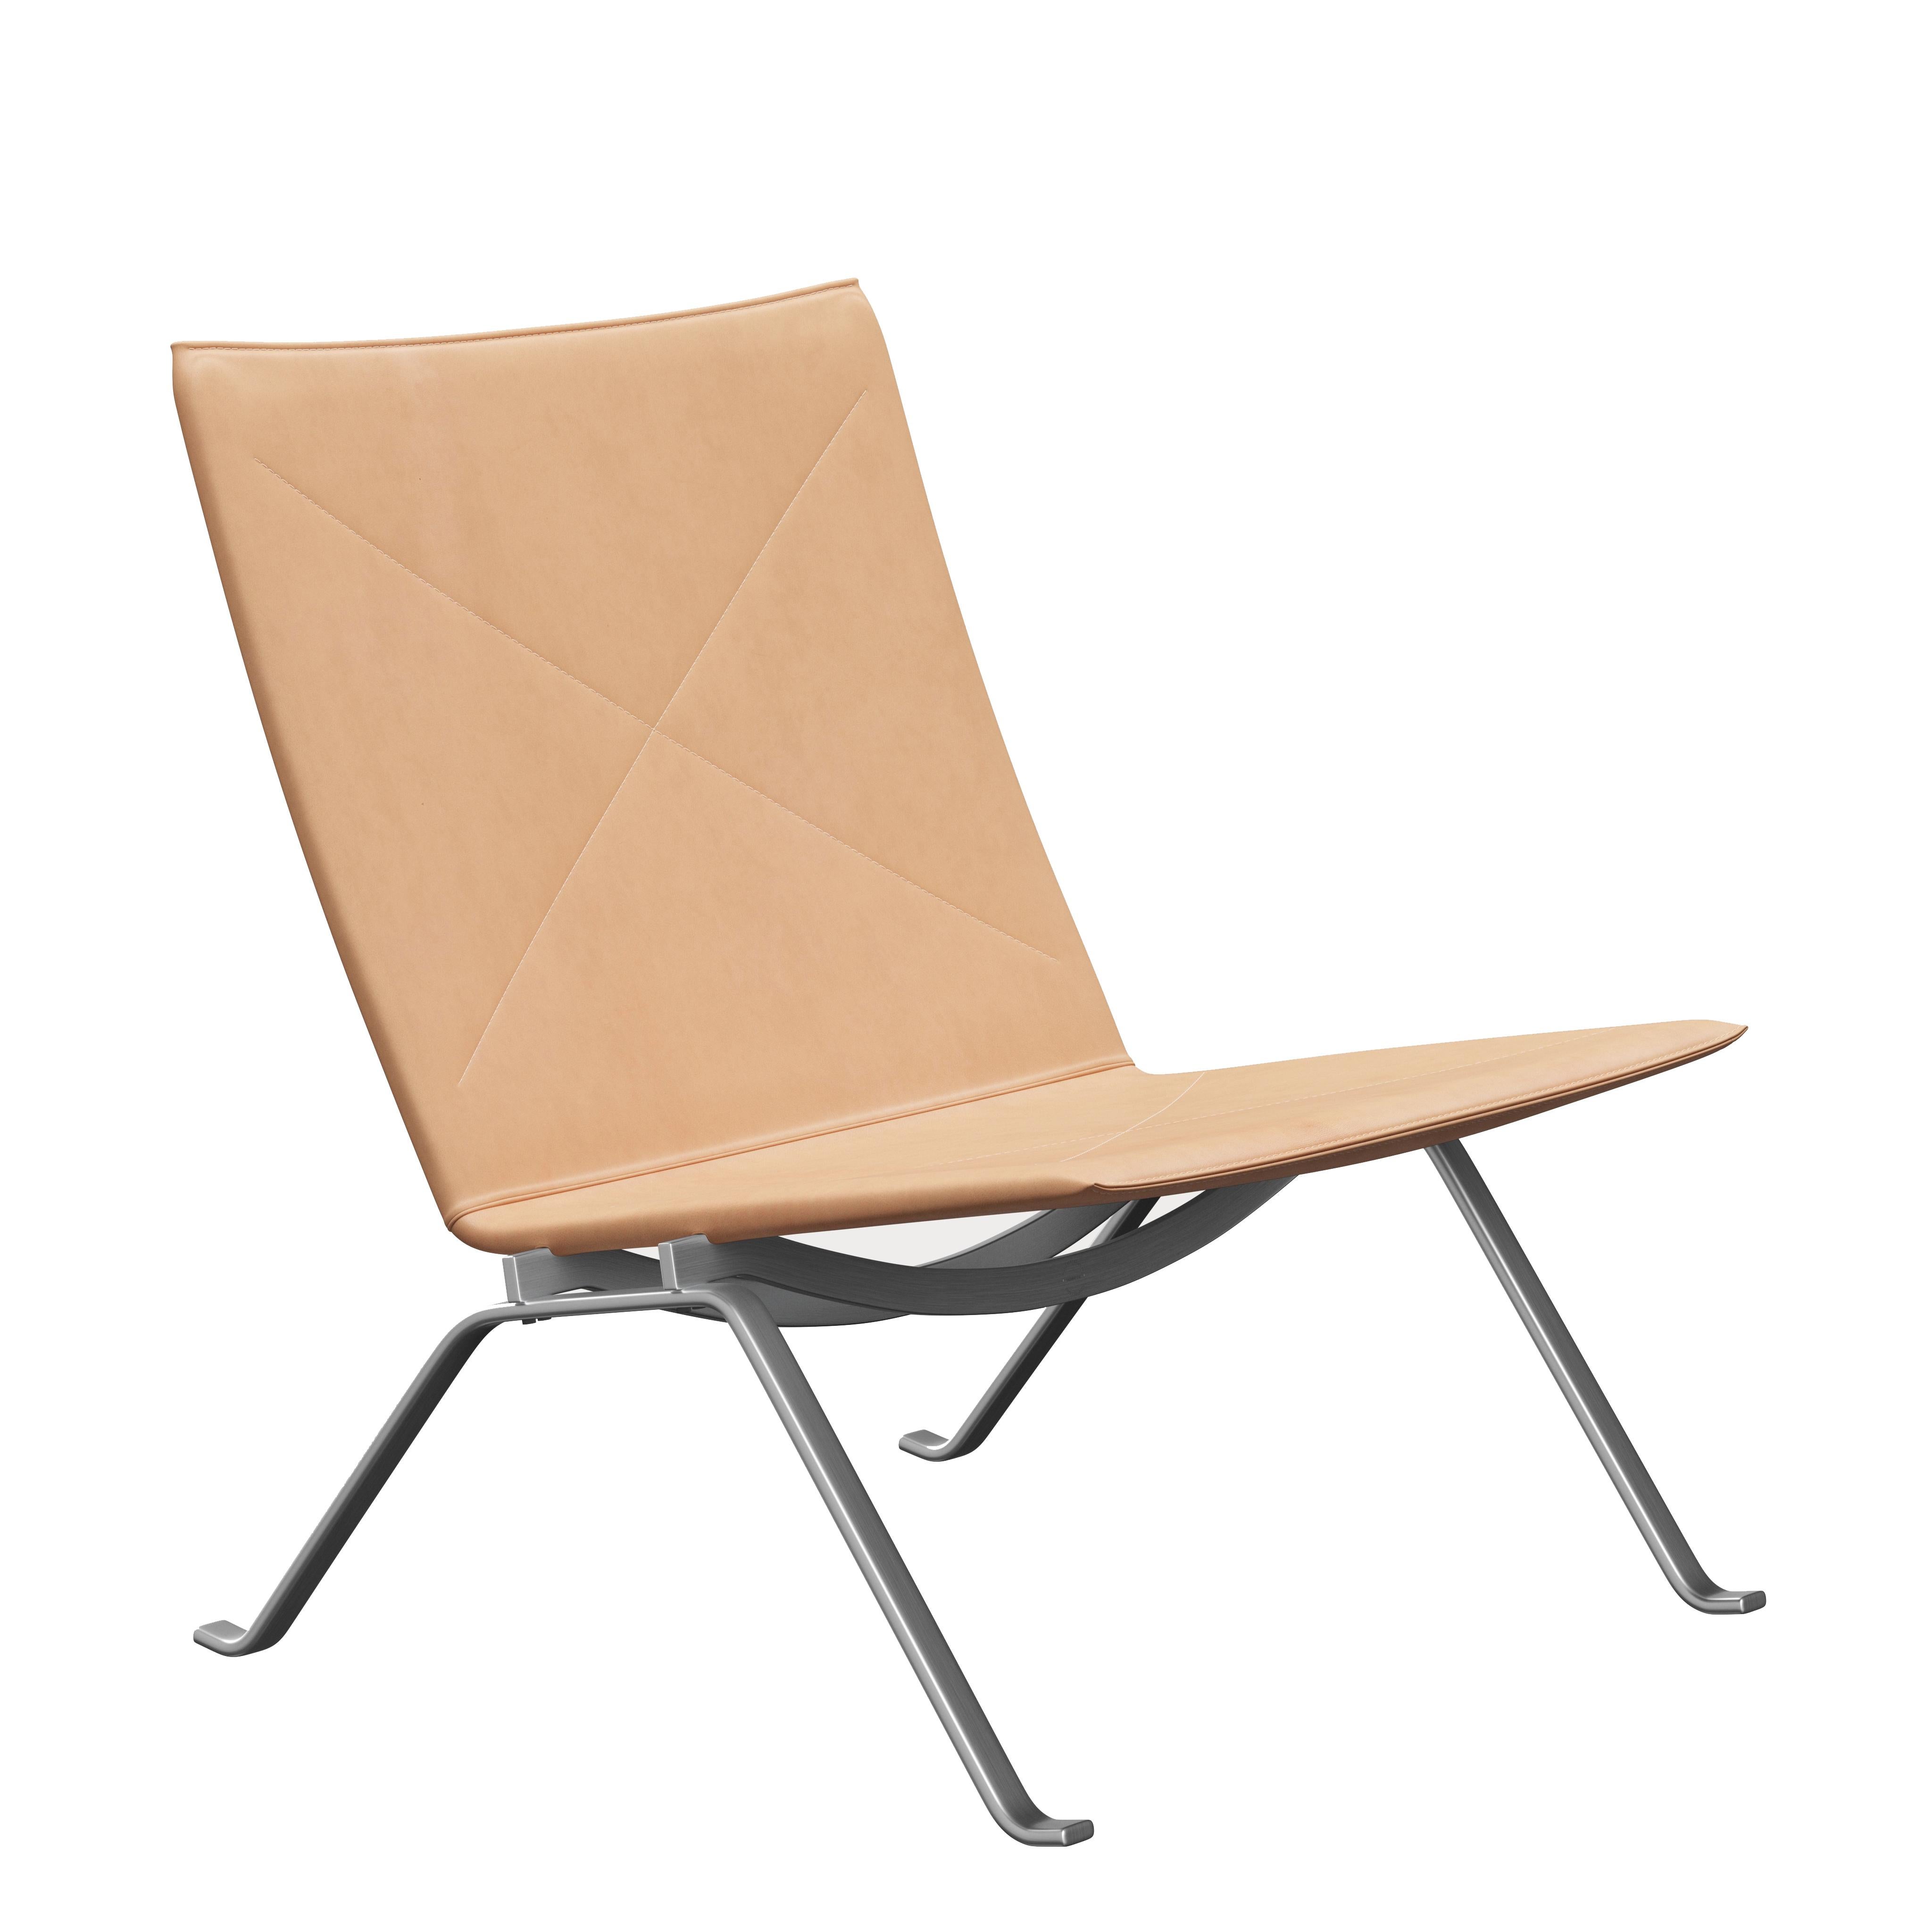 Poul Kjærholm 'PK22' Lounge Chair for Fritz Hansen in Leather (Cat. 5) For Sale 8